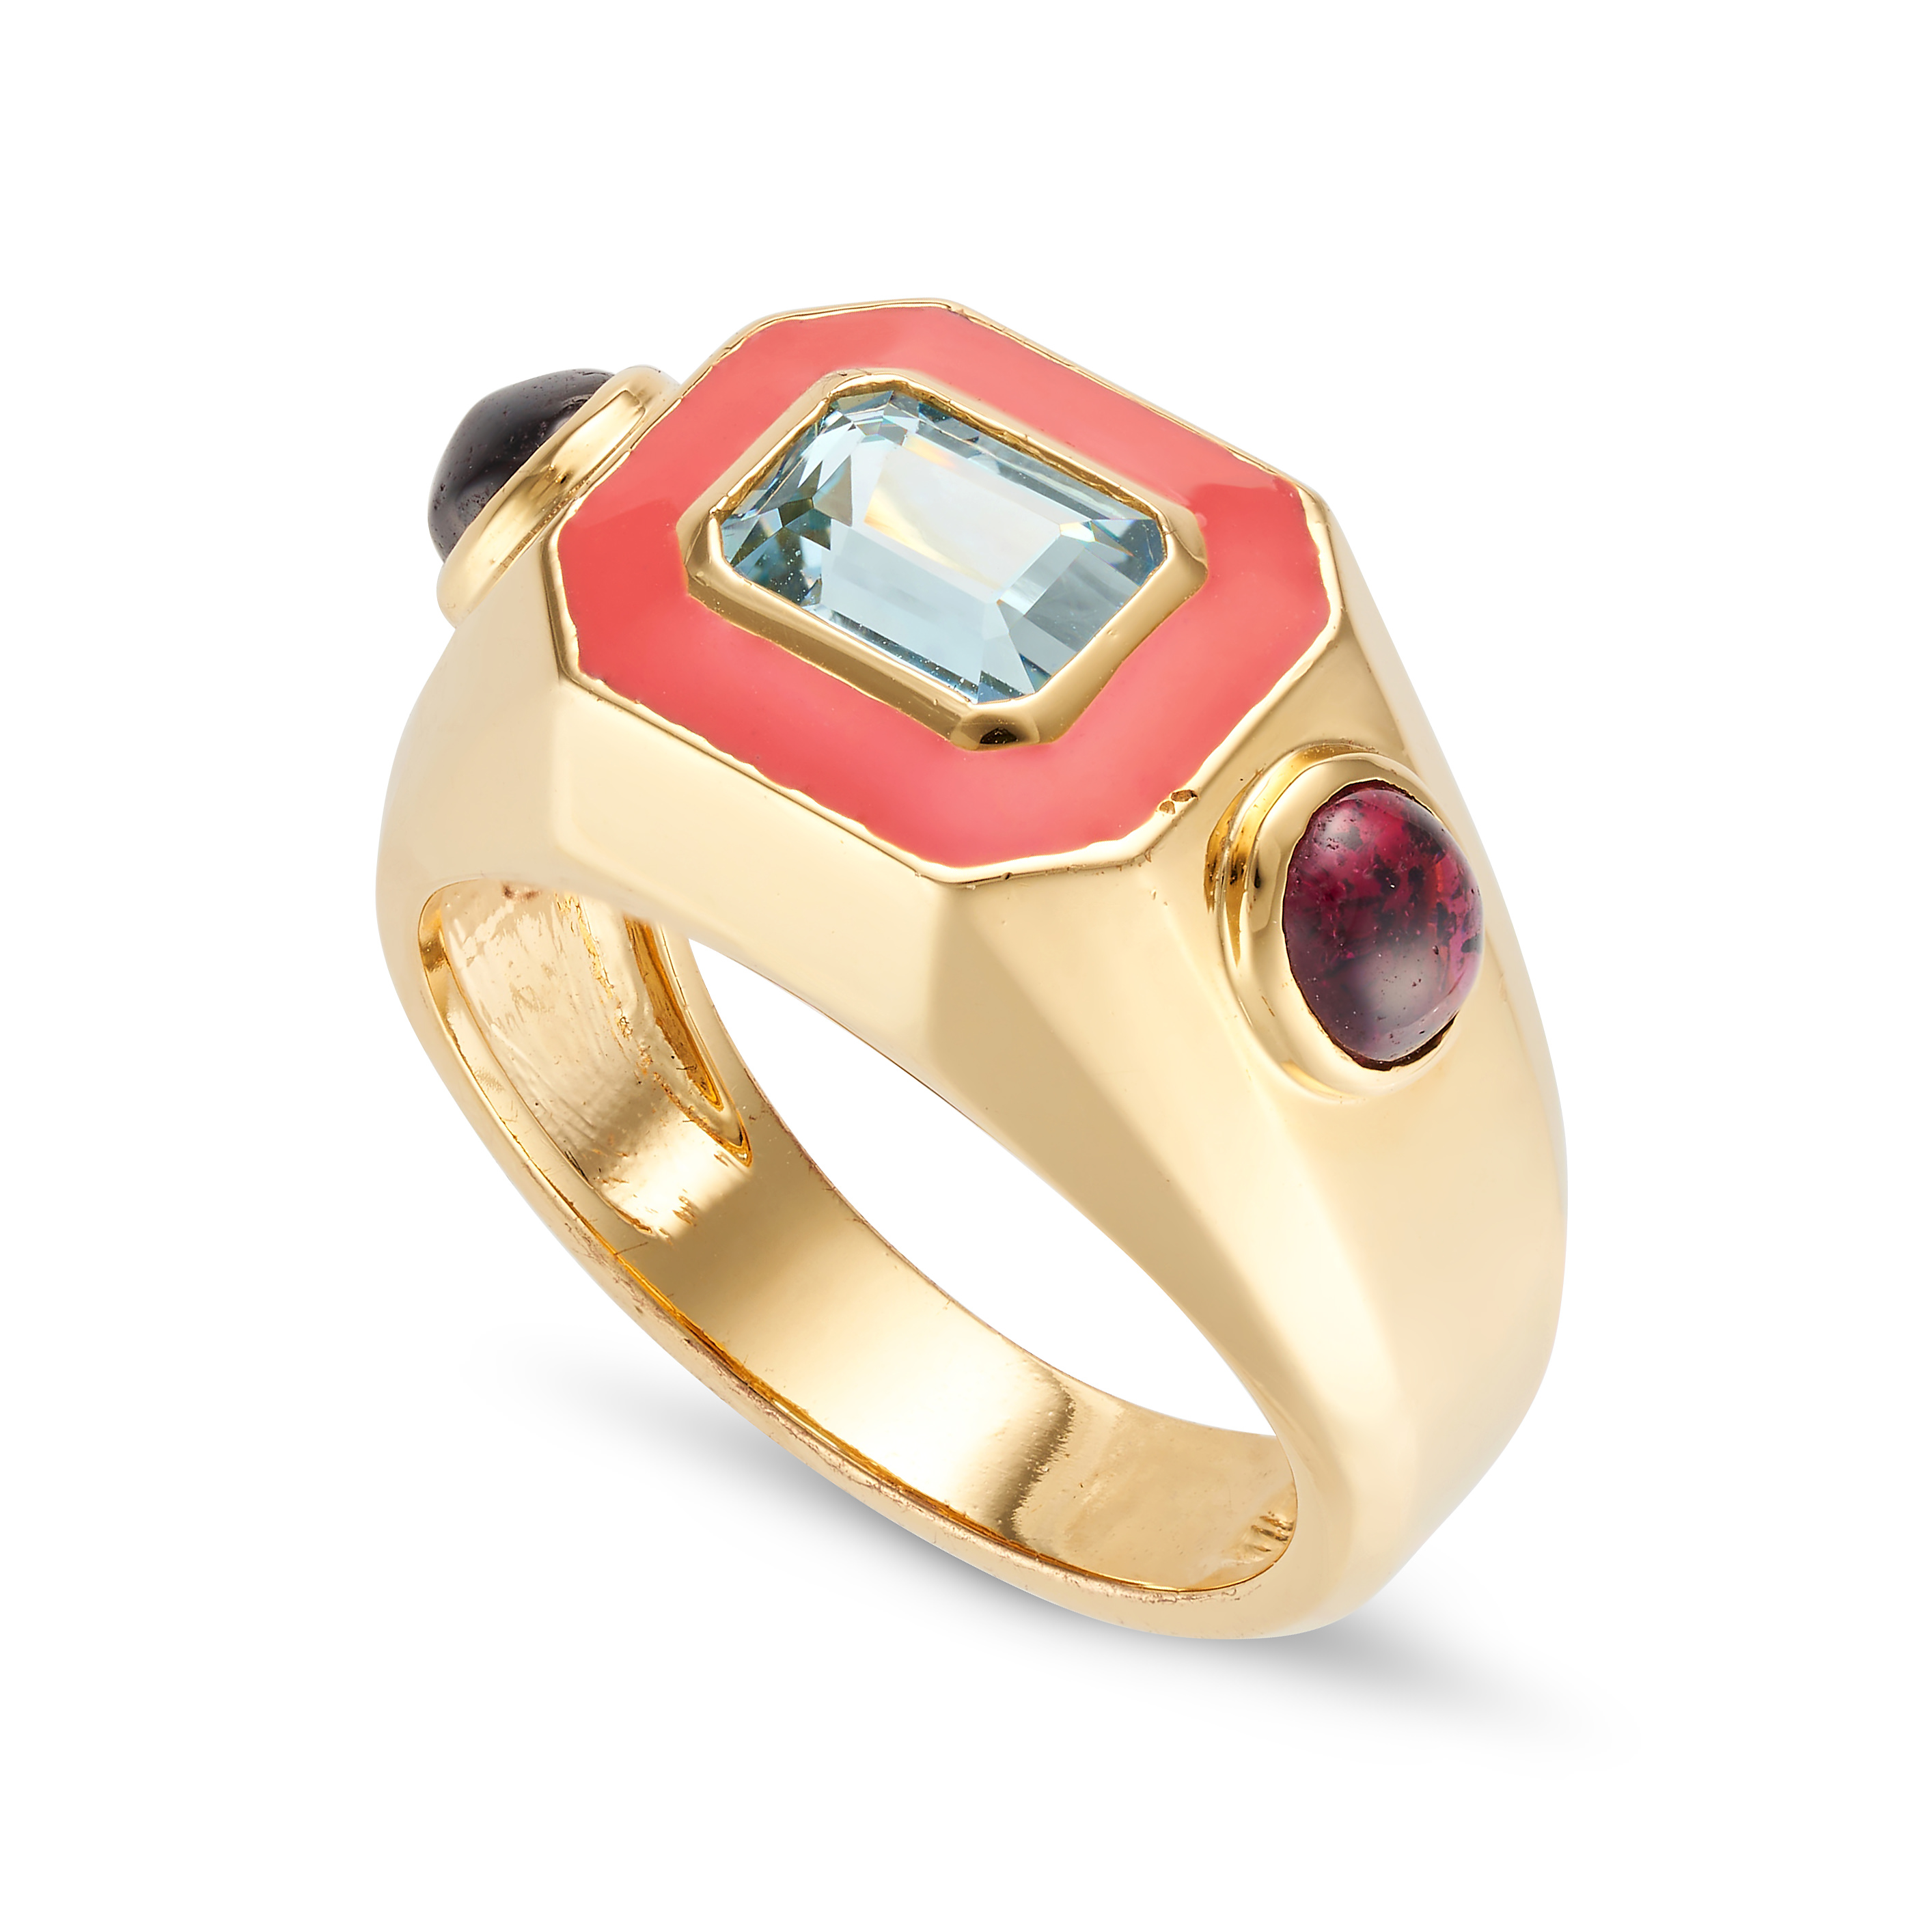 AN AQUAMARINE, GARNET AND ENAMEL RING set with an octagonal step cut aquamarine in a border of or... - Image 2 of 2